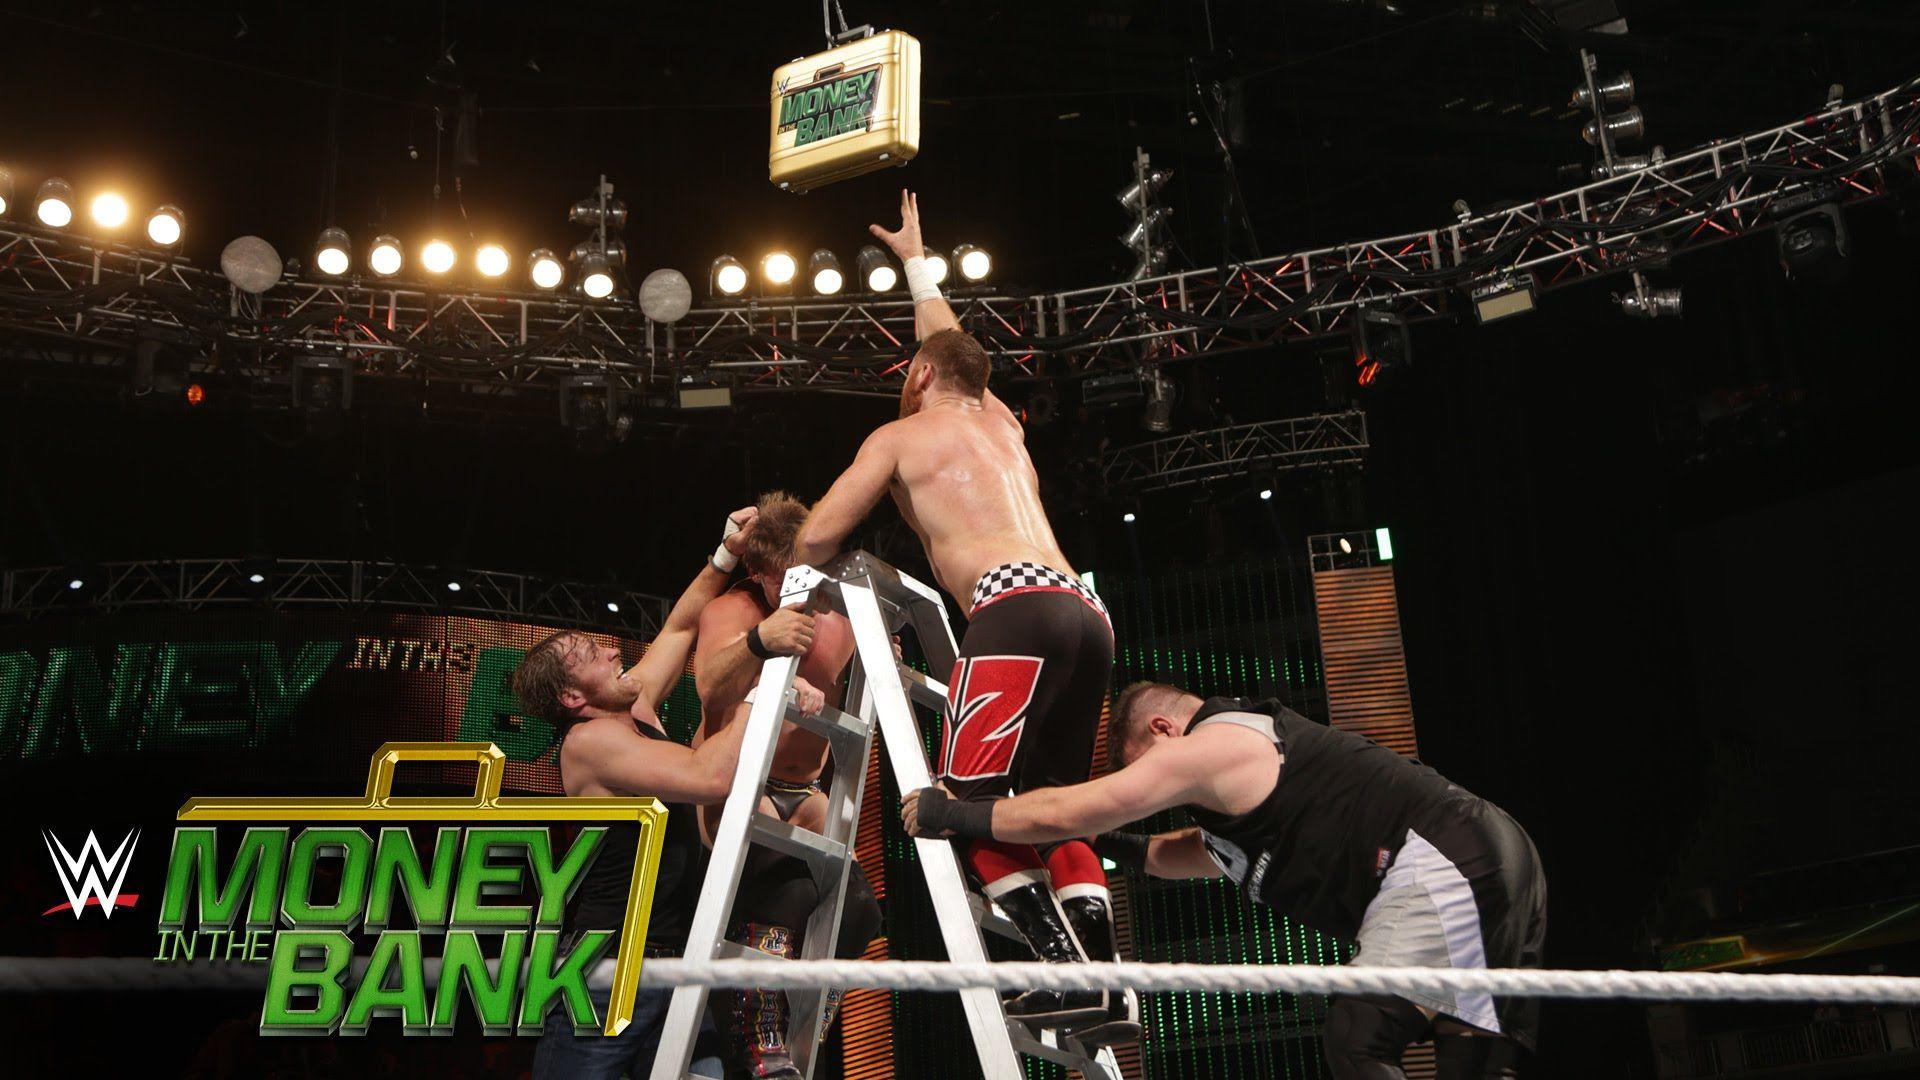 Money in the Bank Contract Ladder Match: WWE Money in the Bank 2016